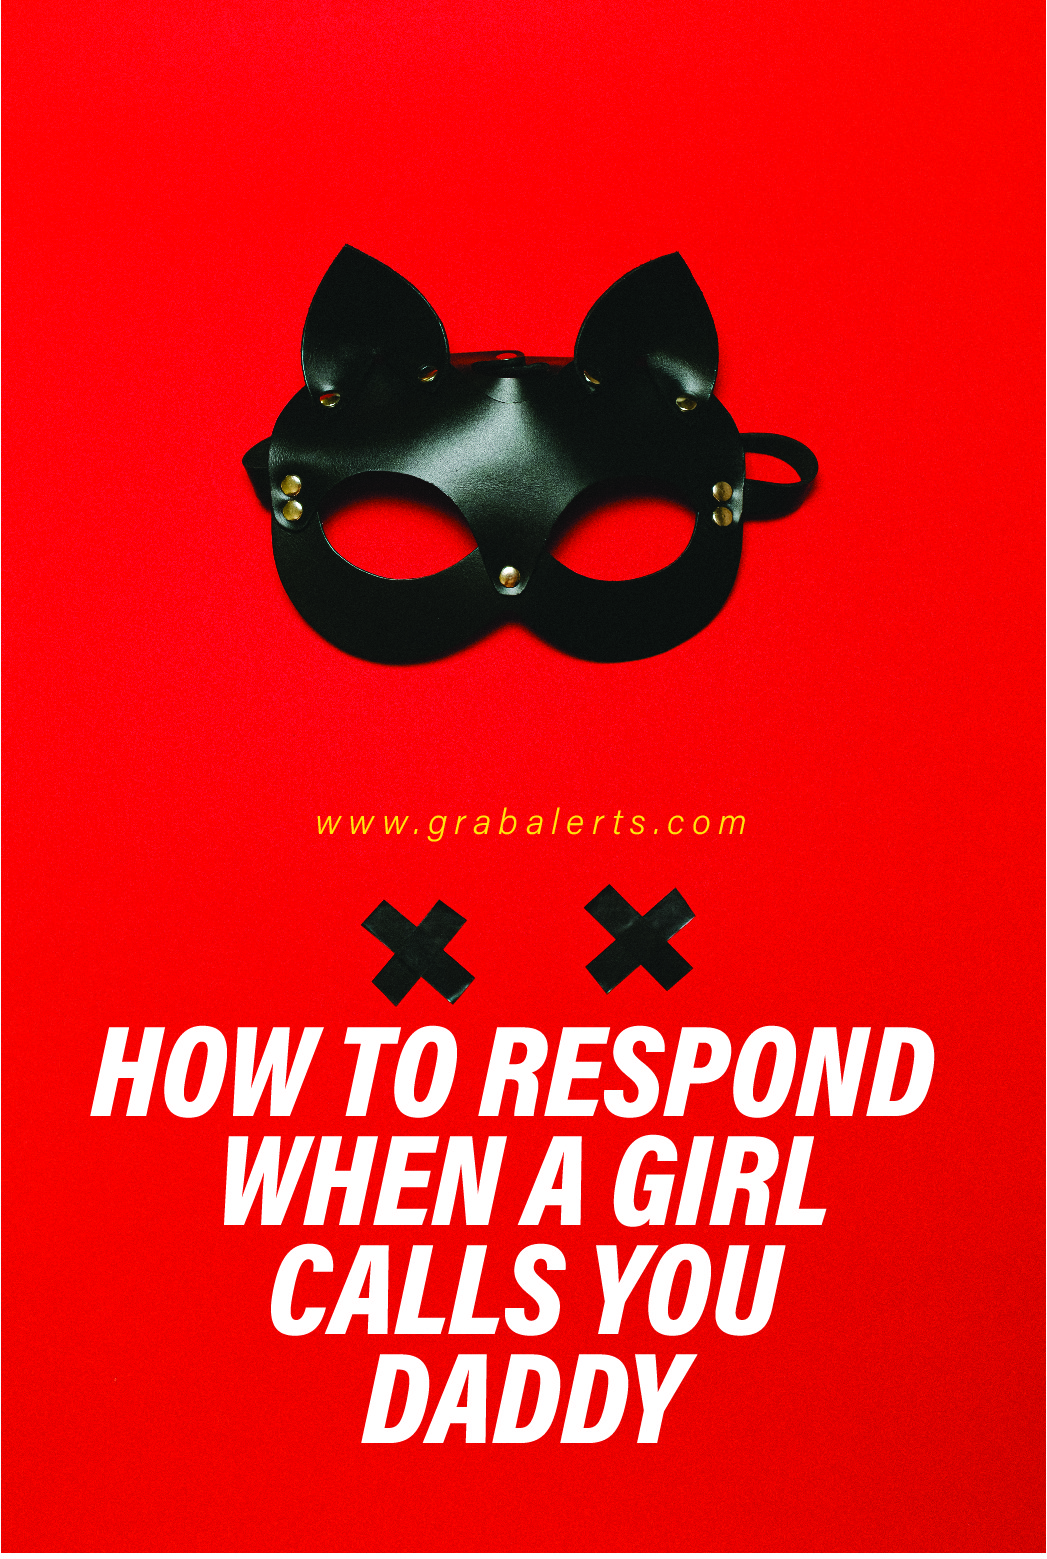 How to Respond When a Girl Calls You Daddy? 10 Easy Tips